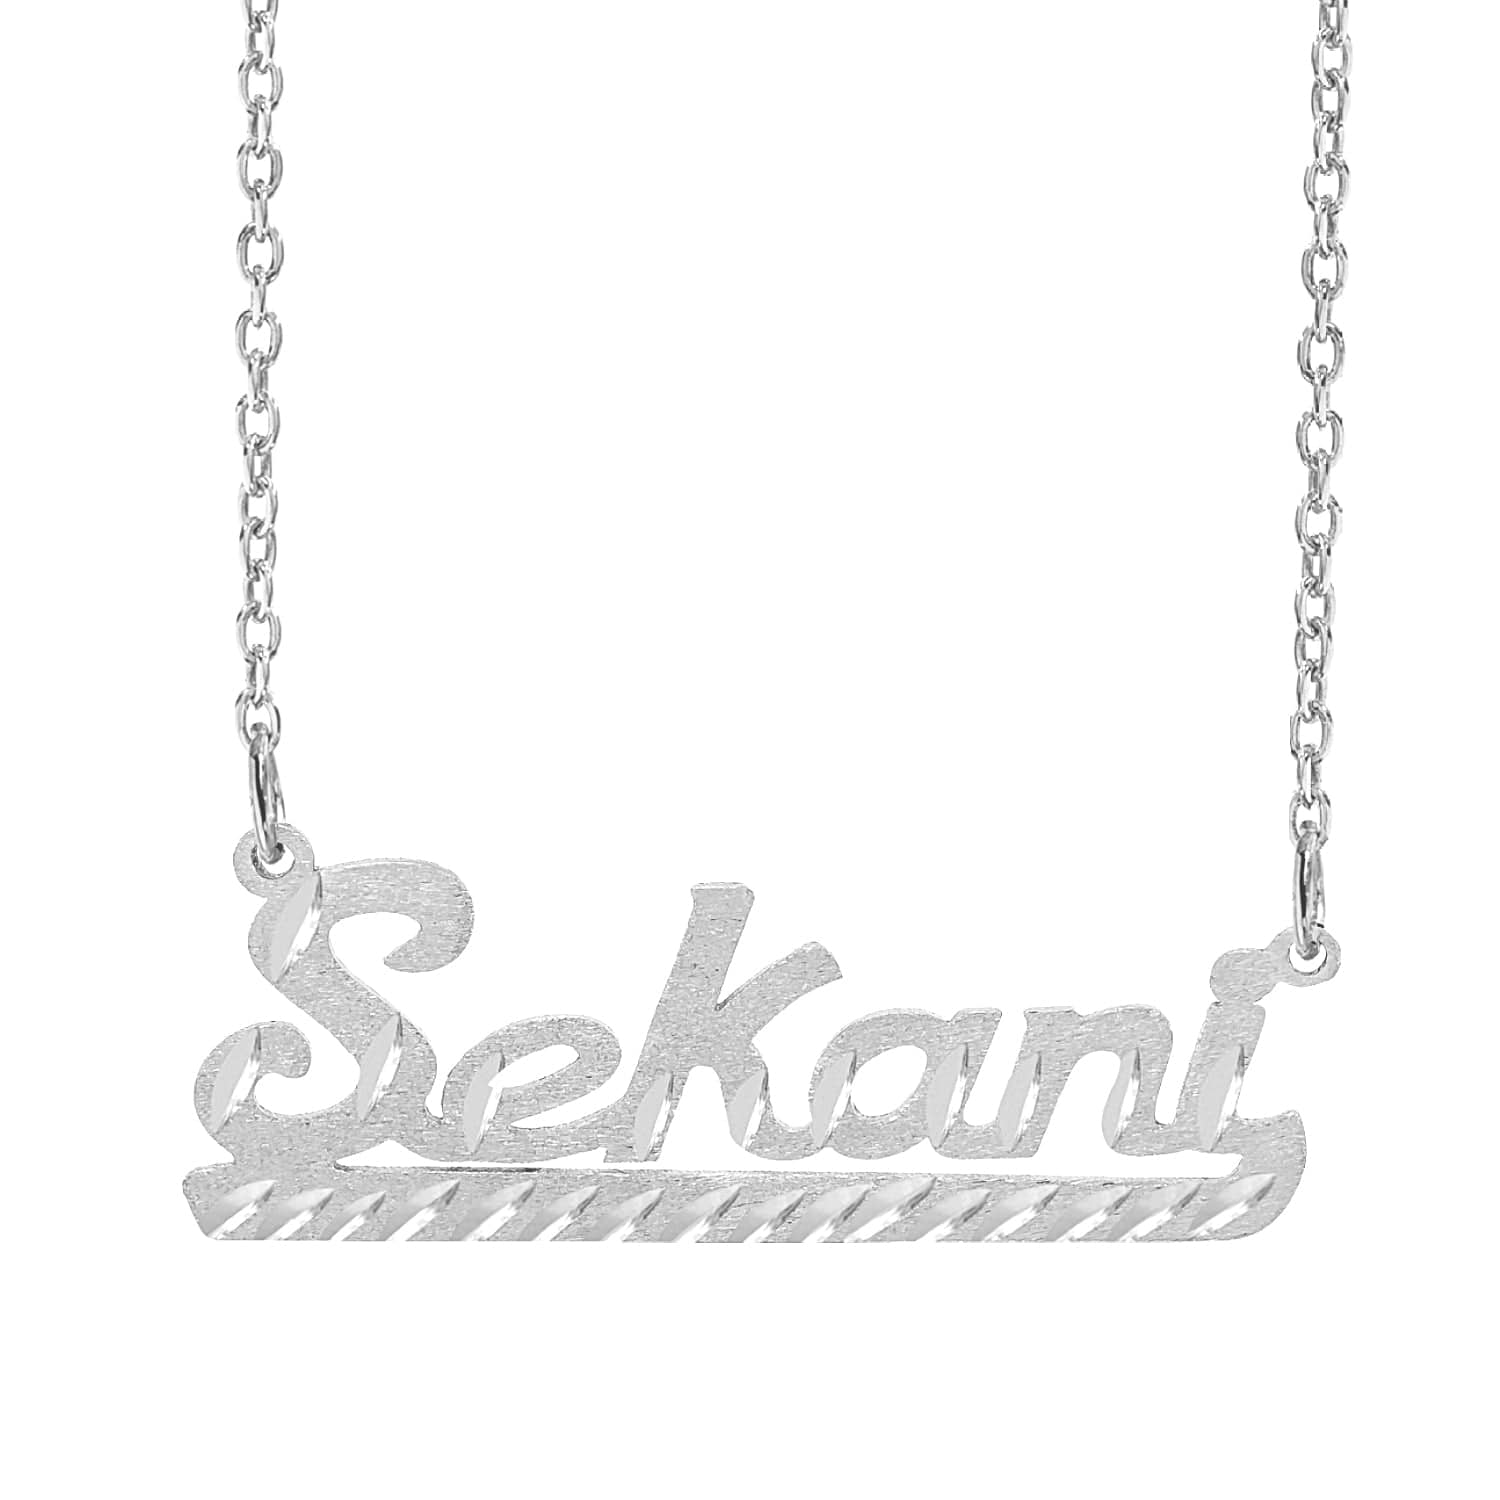 Sterling Silver / Link Chain Personalized Name necklace with Diamond Cut "Sekani"